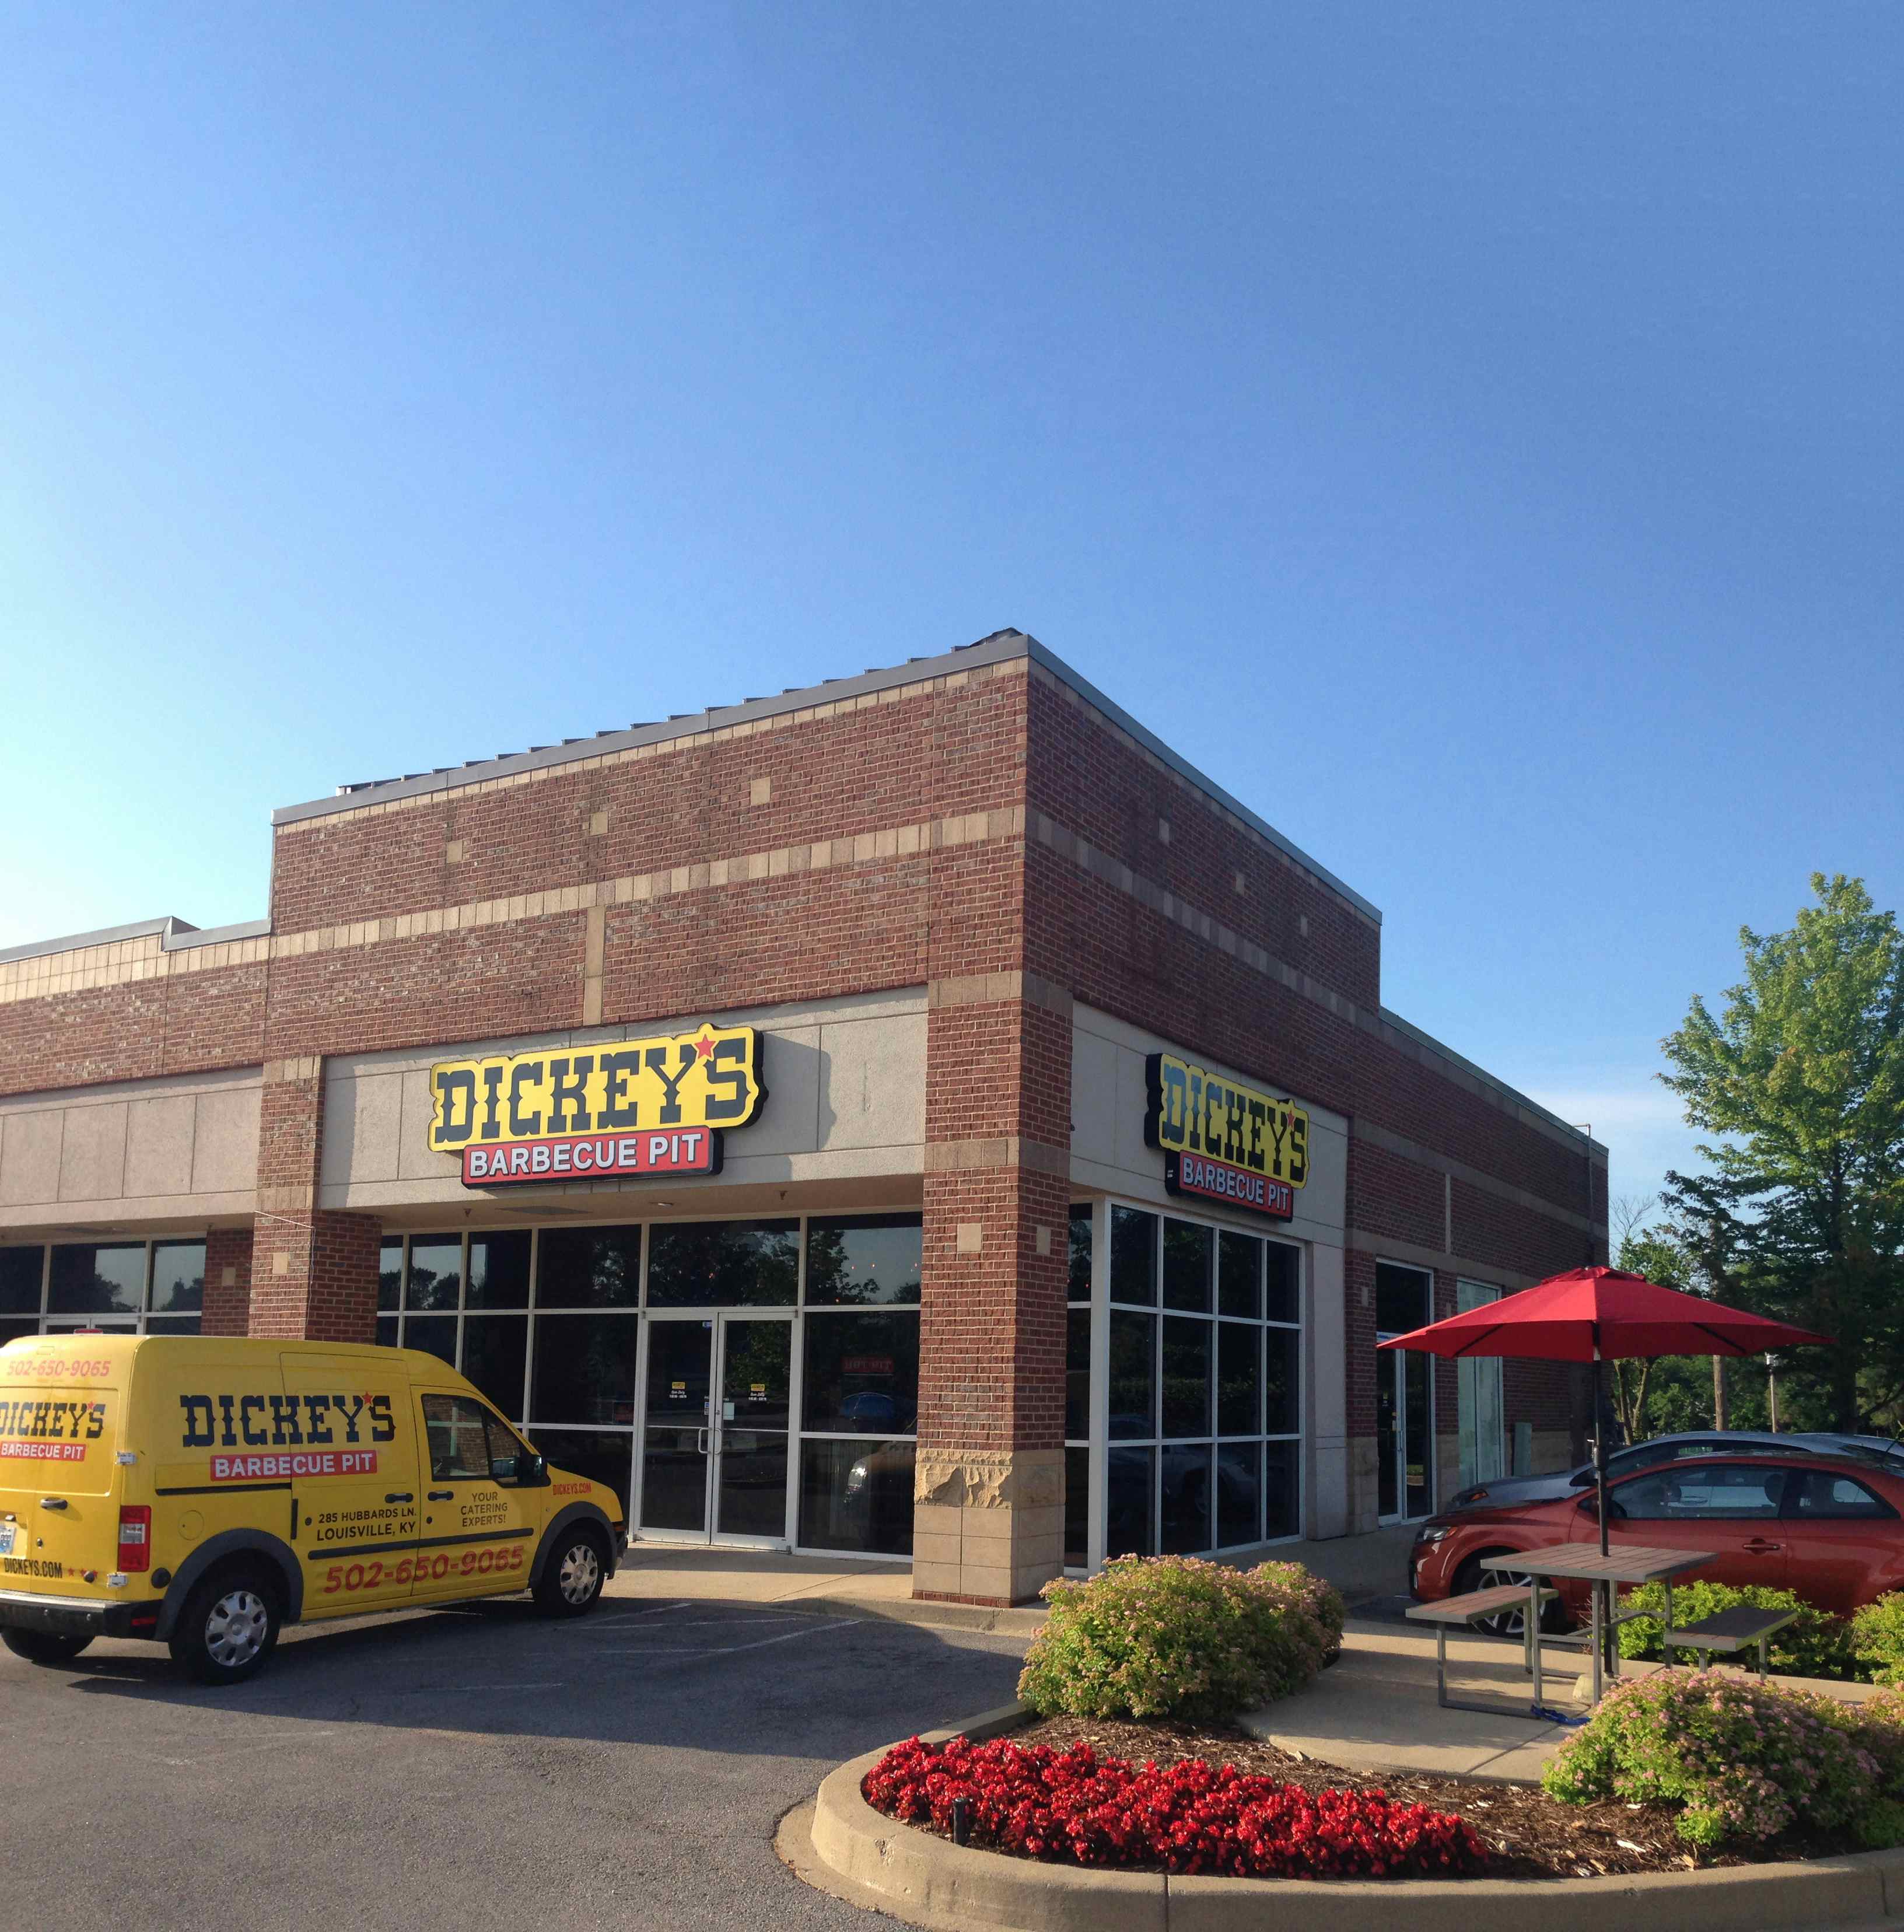 The Daily Meal: Gold Standard Cleaning System Debuts at Dickey’s Barbecue Pit Locations Nationwide